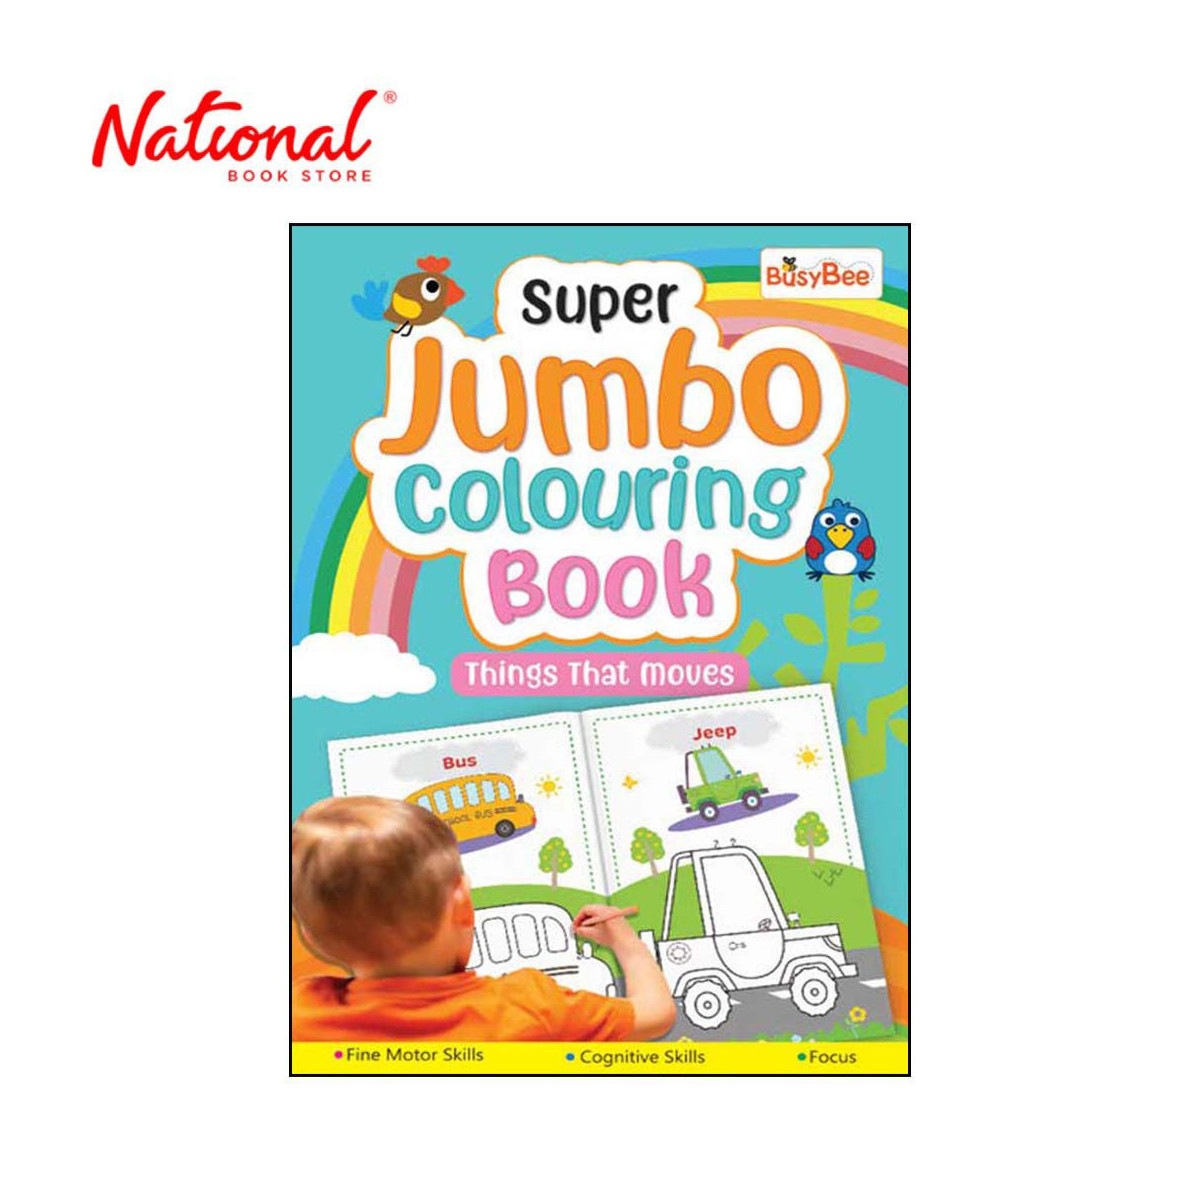 Super Jumbo Colouring Book: Things That Move - Trade Paperback - Activity Books for Kids